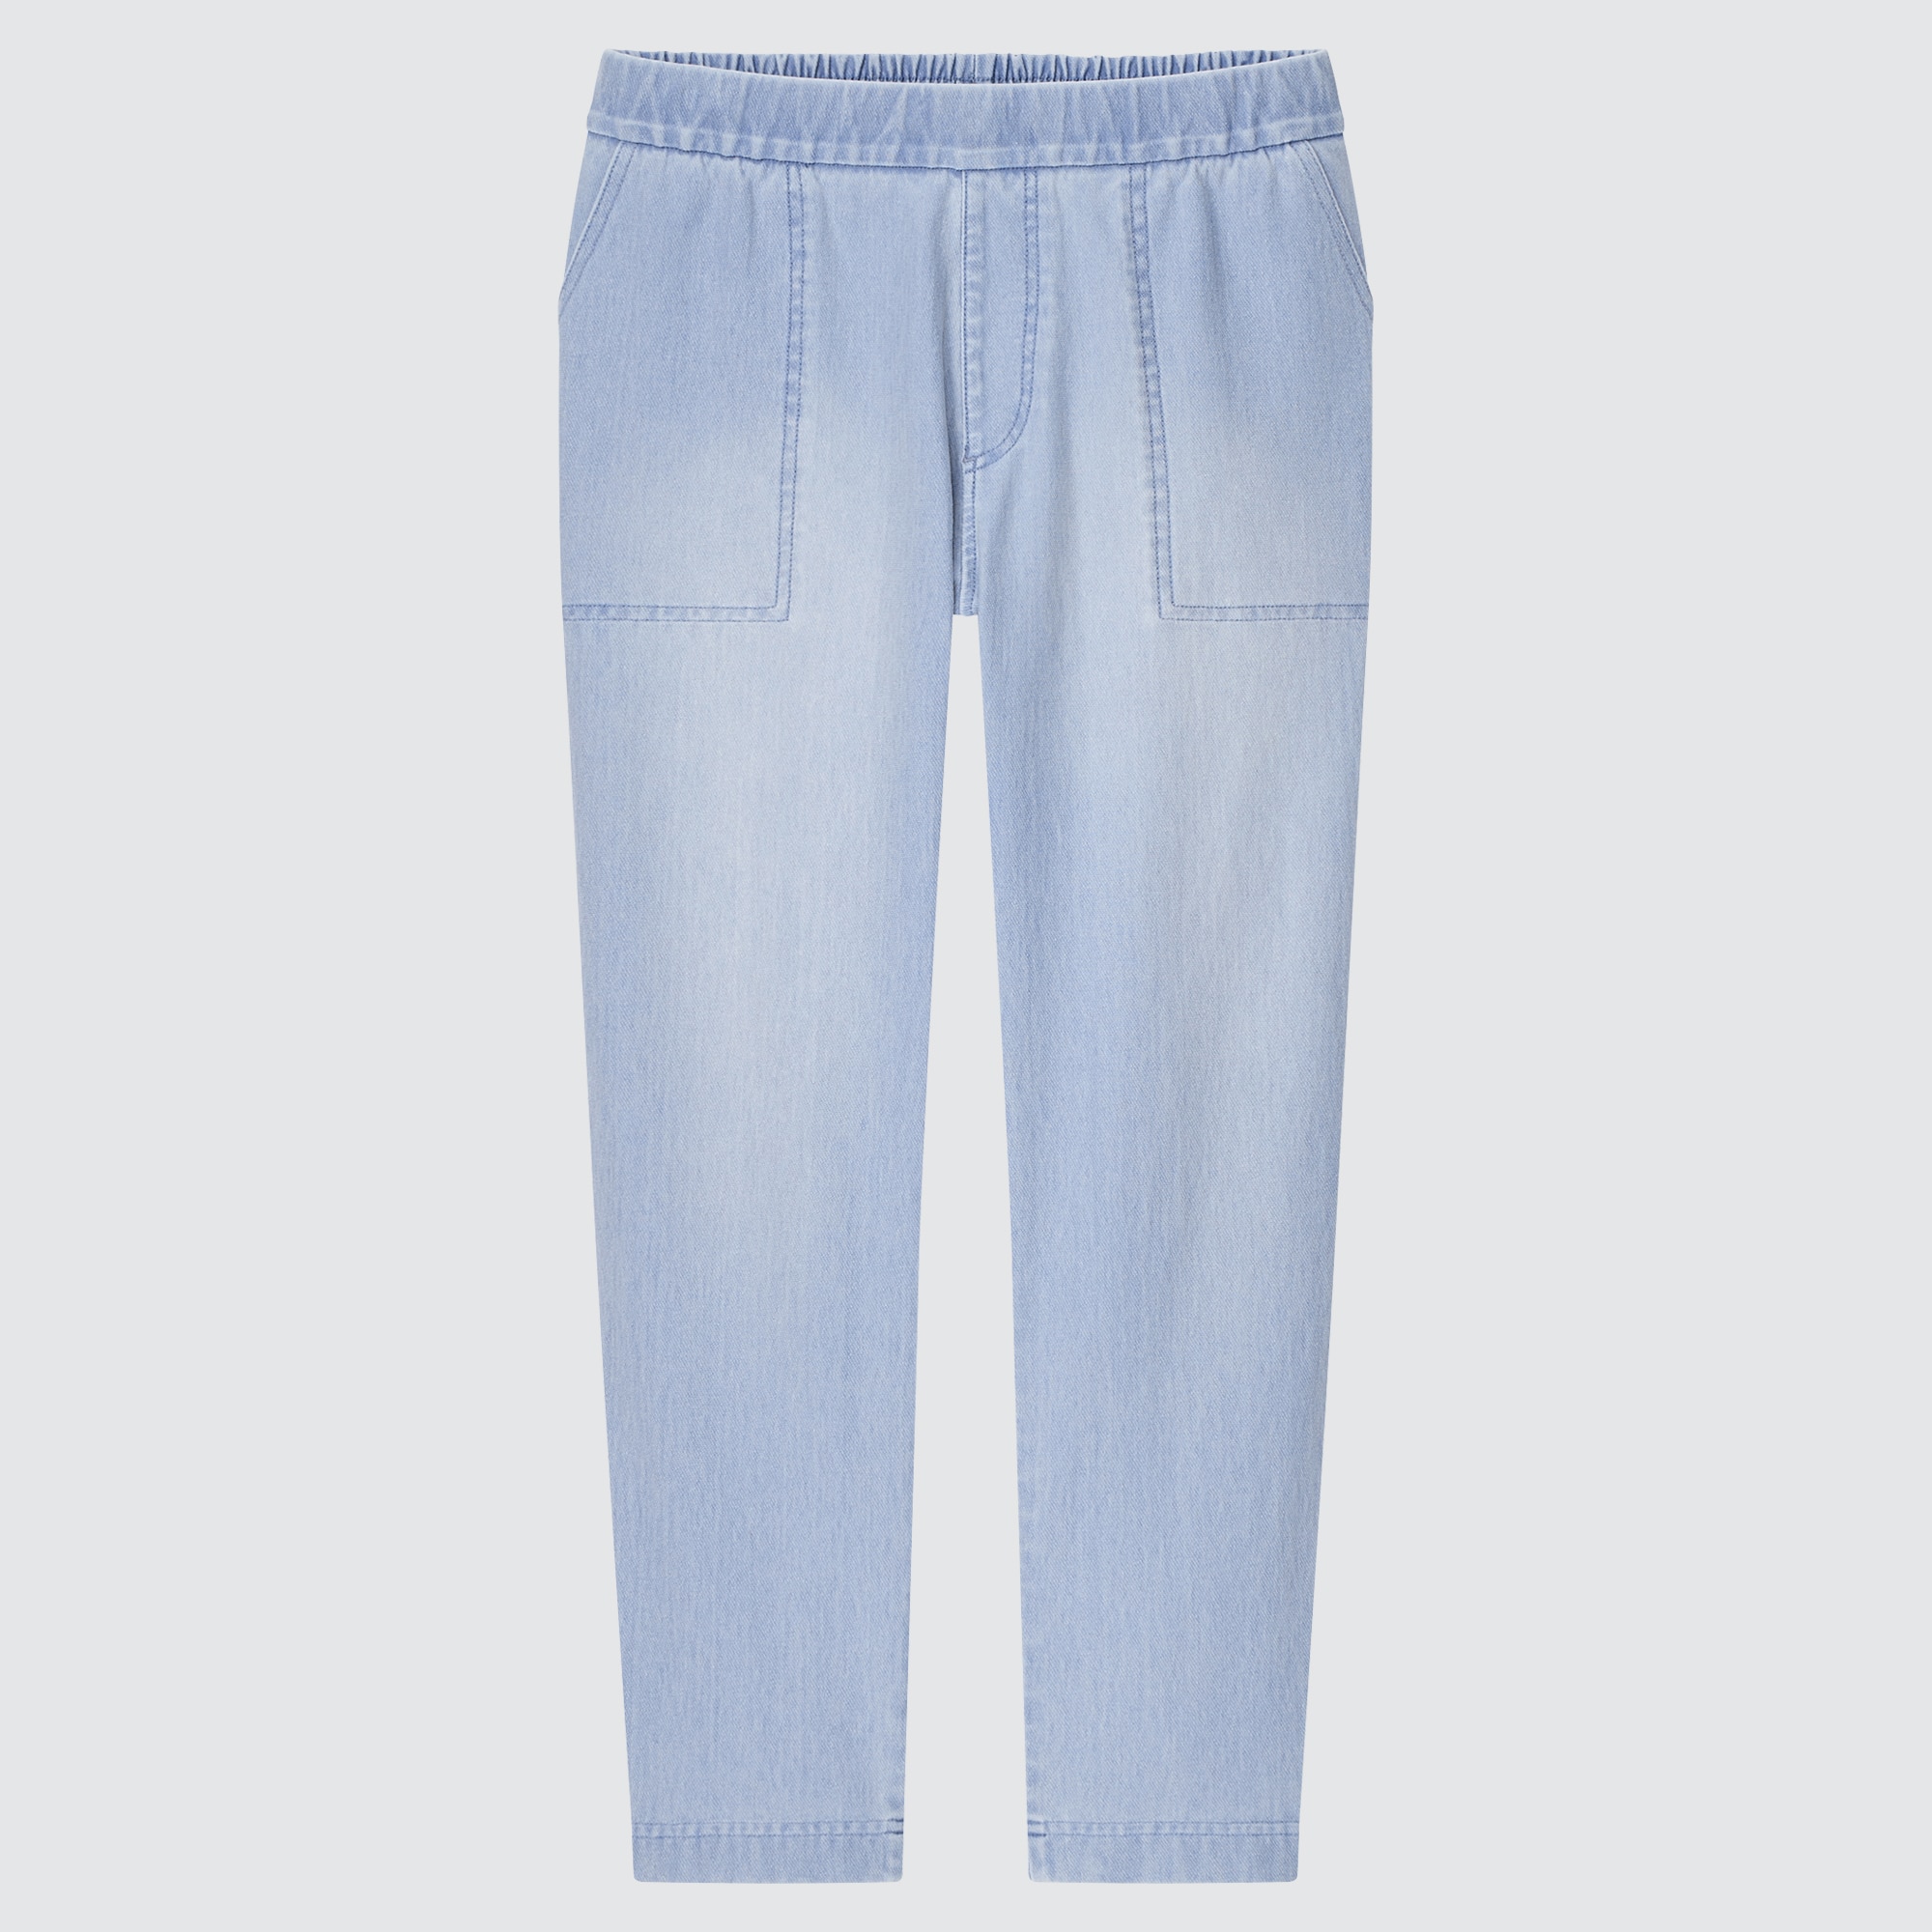 Check styling ideas for「Denim Jersey Pants」| UNIQLO SG